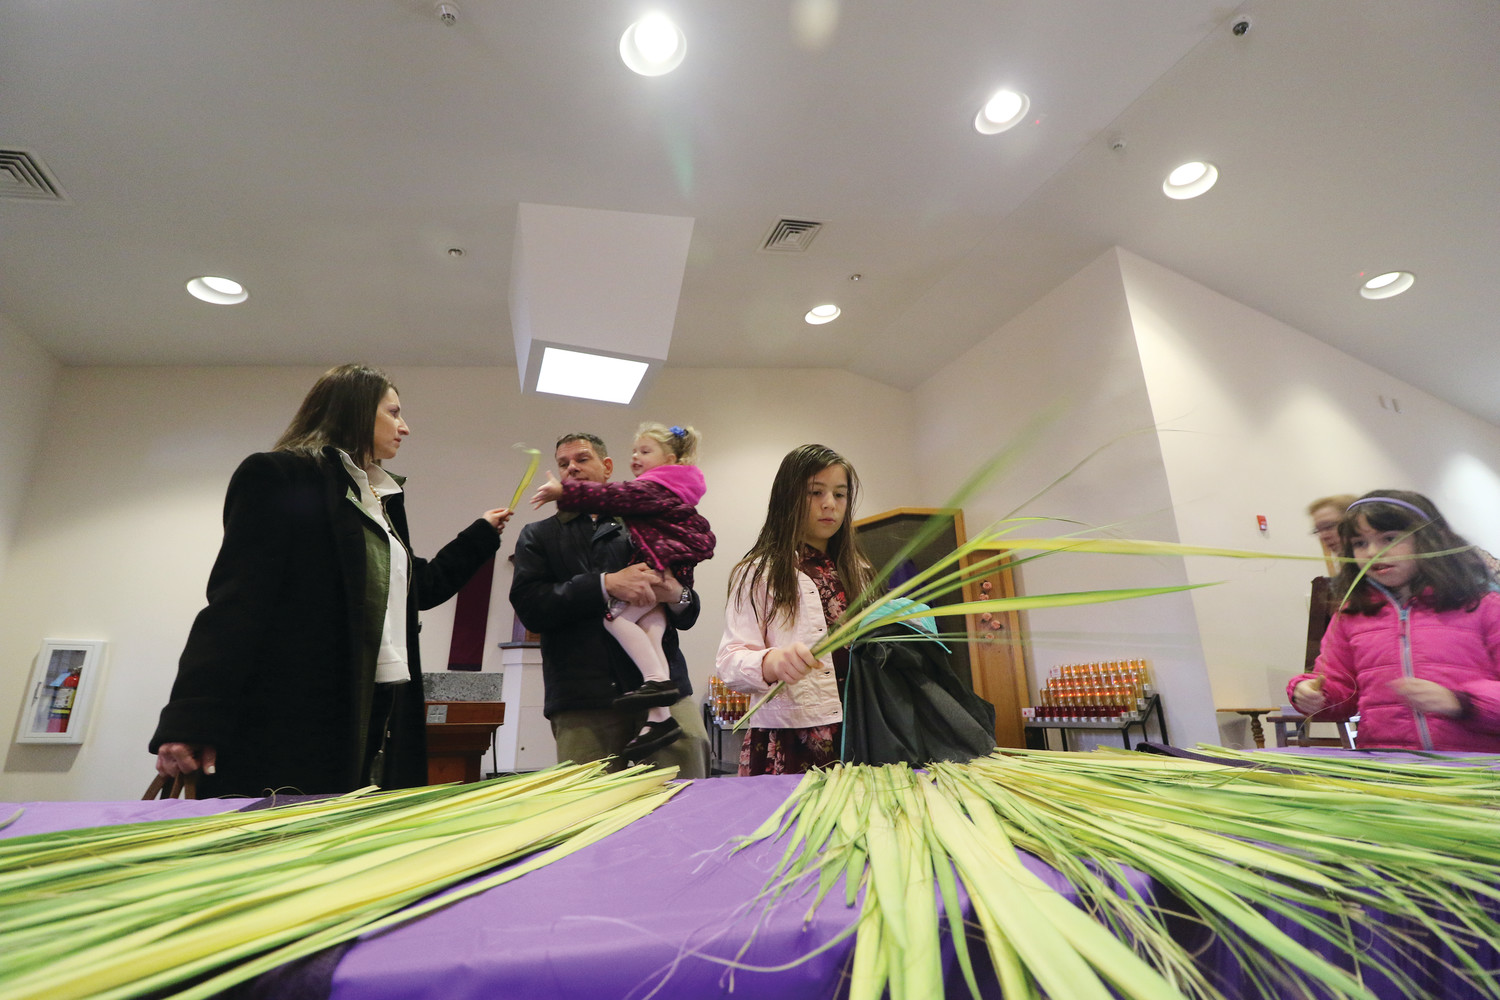 Parishioners reach for palm fronds after arriving for Palm Sunday Mass March 25 at St. Theresa Church in Tiverton.